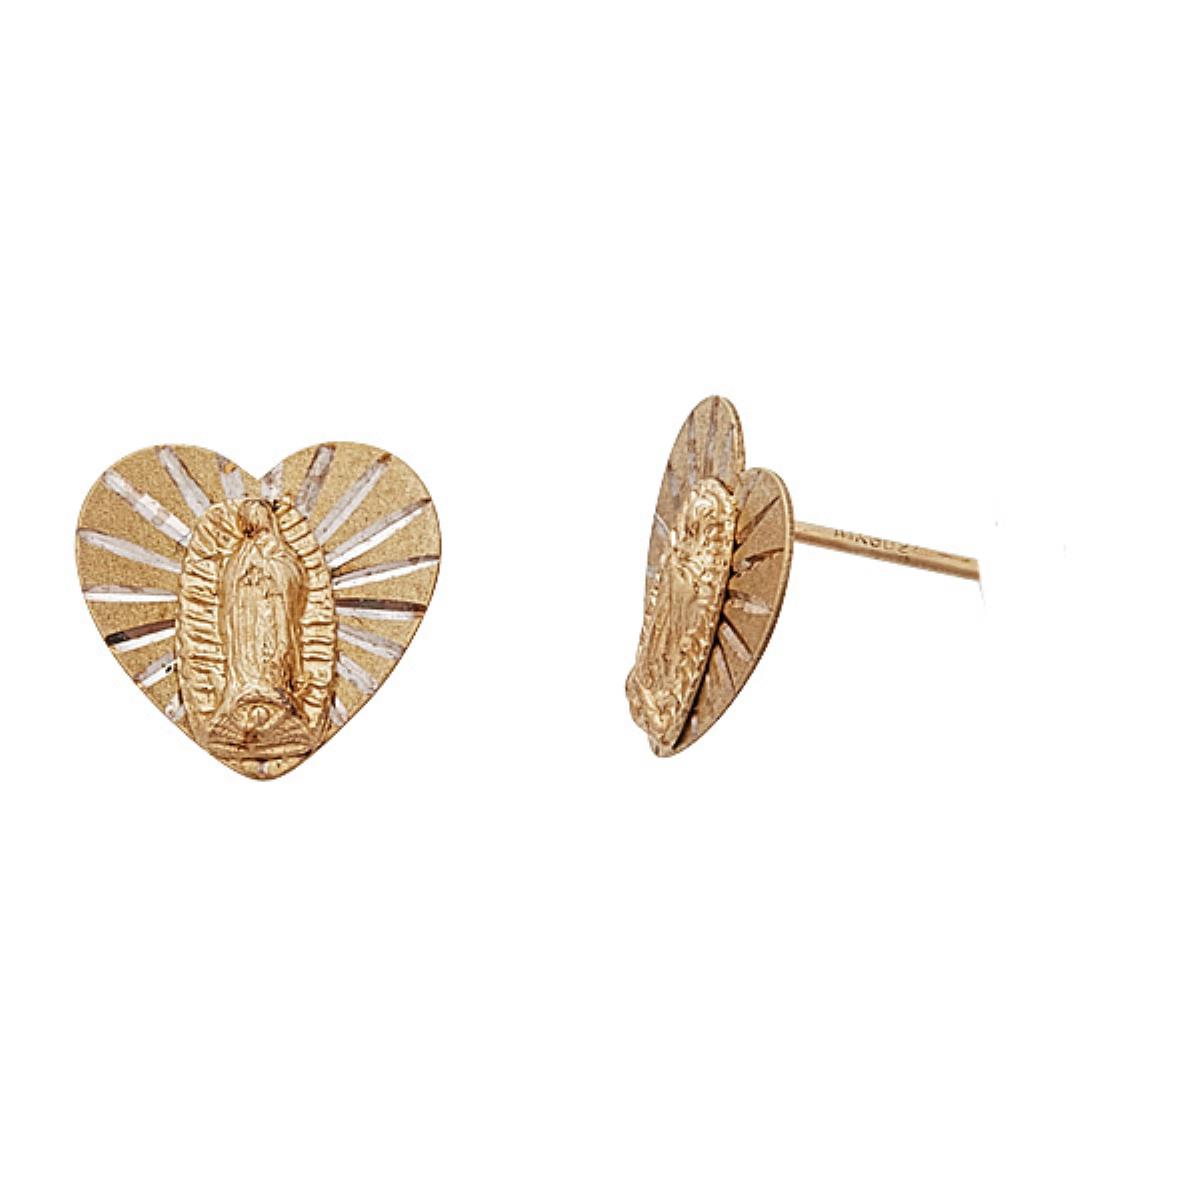 10K Yellow Gold Textured Heart Virgin Mary Stud Earrings with Bubble Silicone Backs